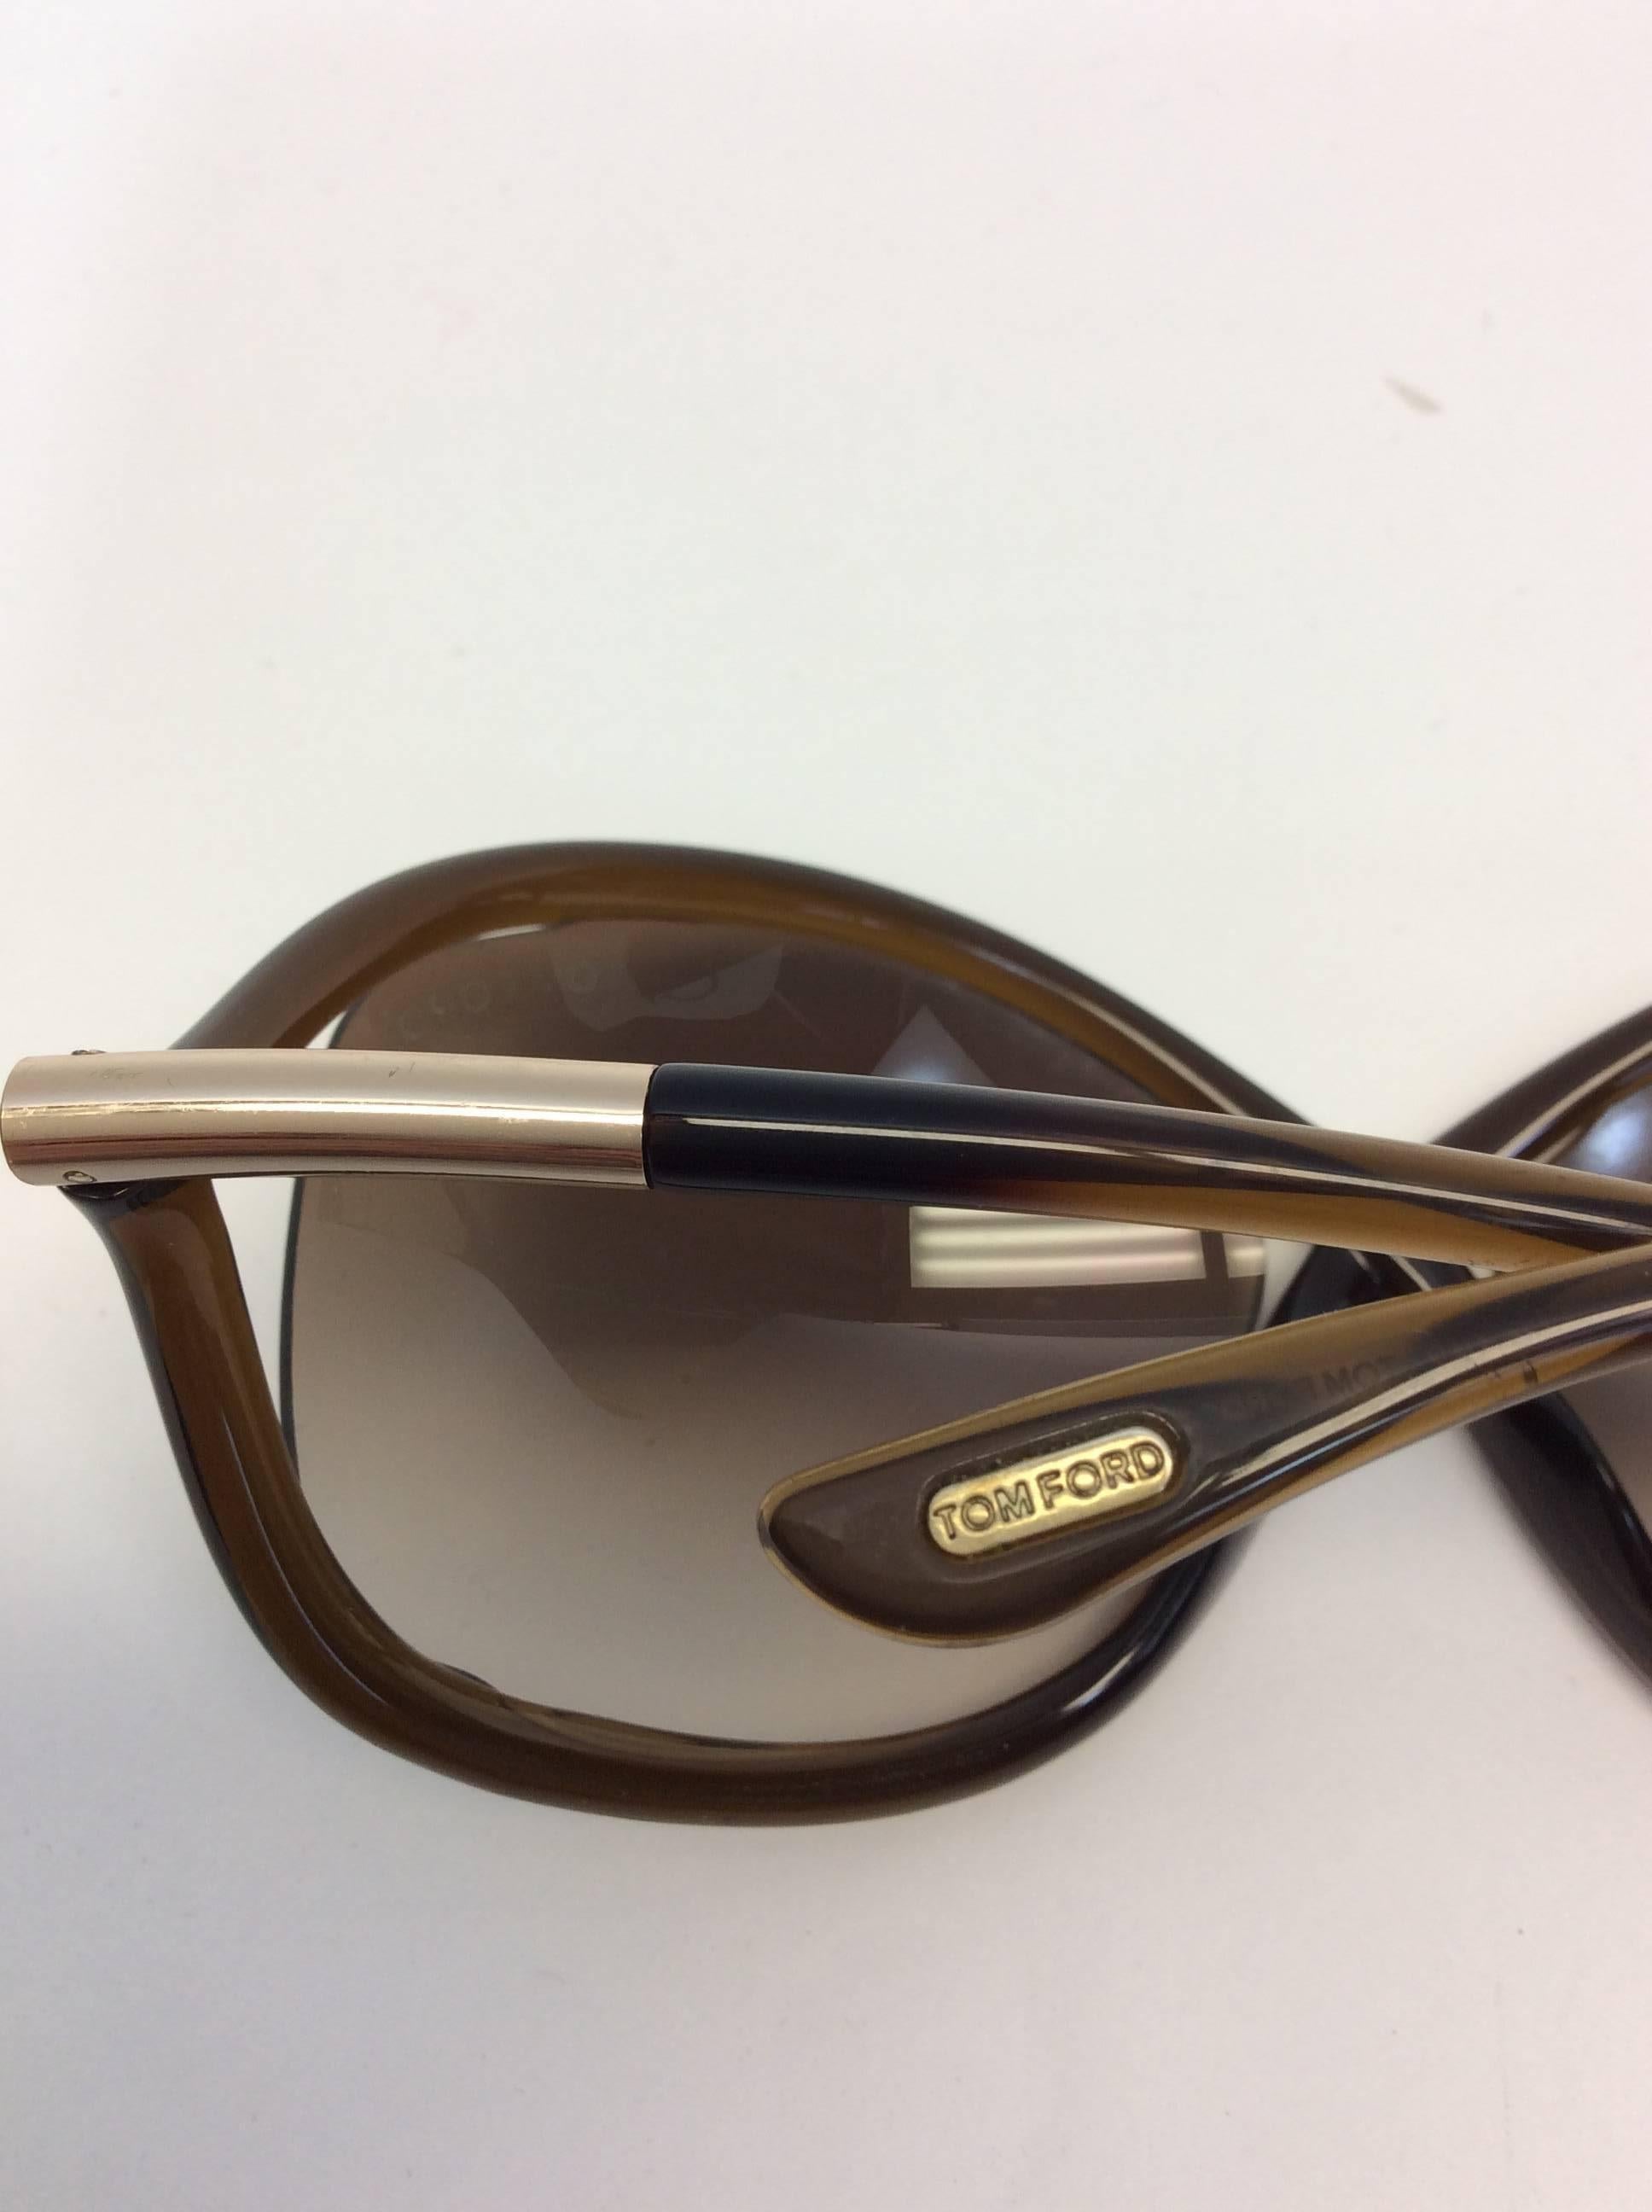 Tom Ford Brown Oversized Sunglasses For Sale 1